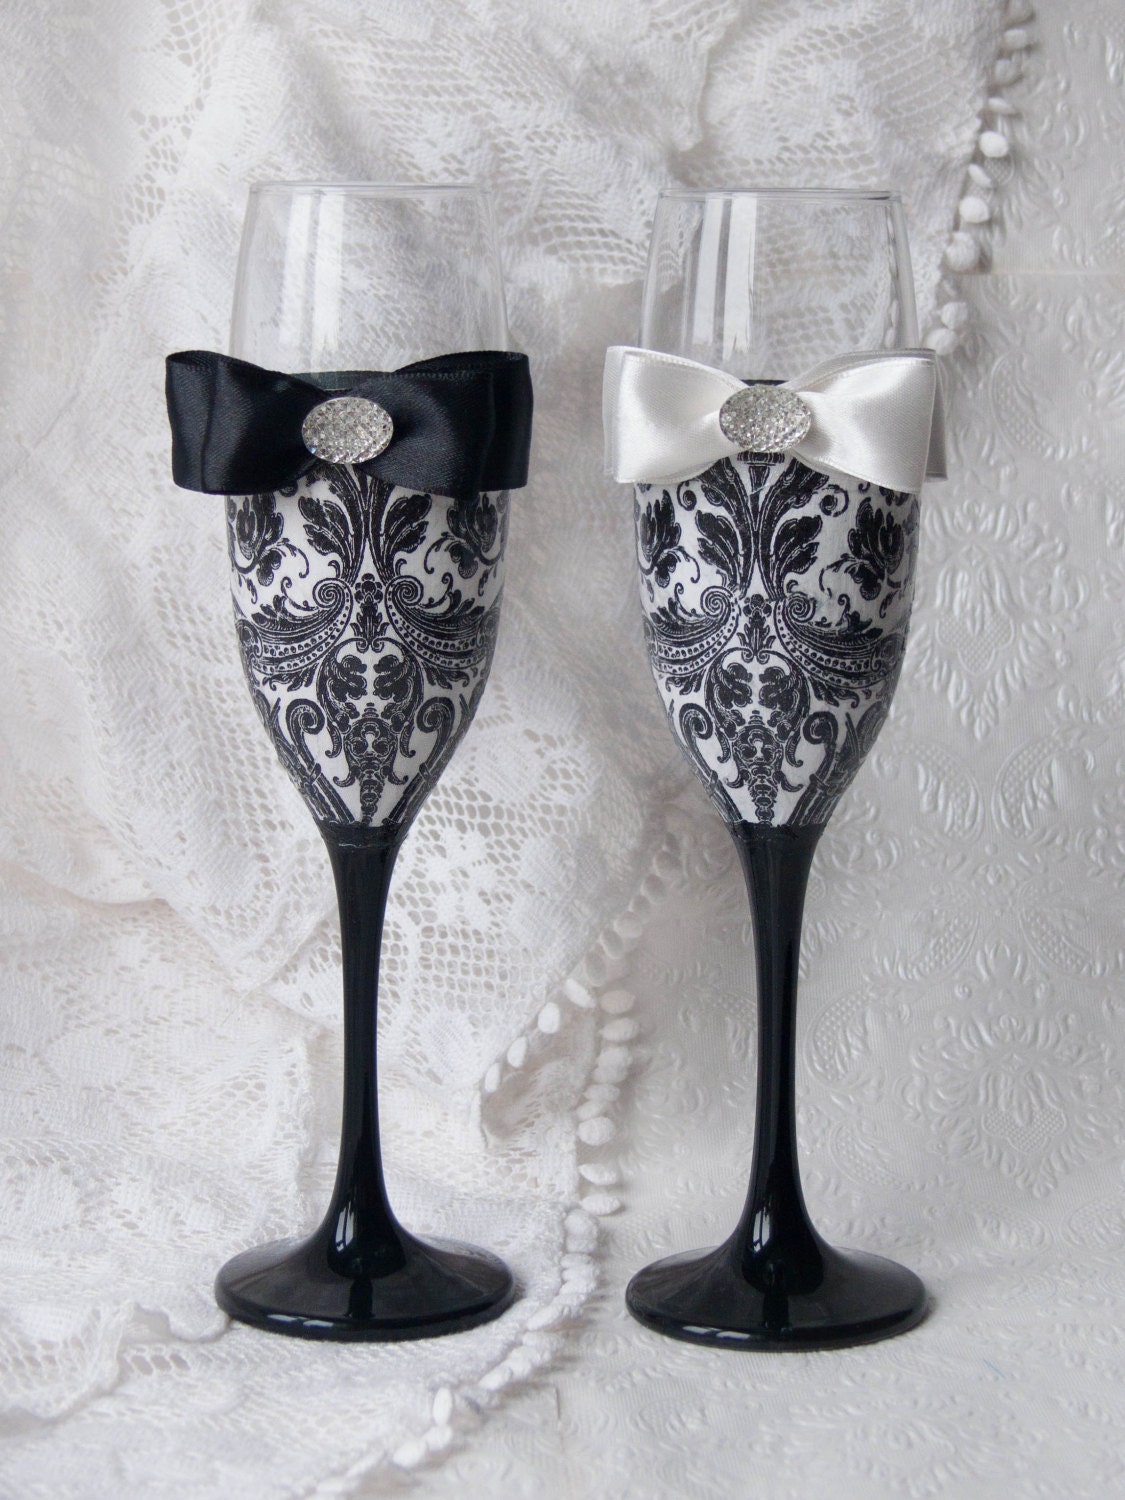 Personalized Wedding glasses from the collection DAMASK black and white wedding